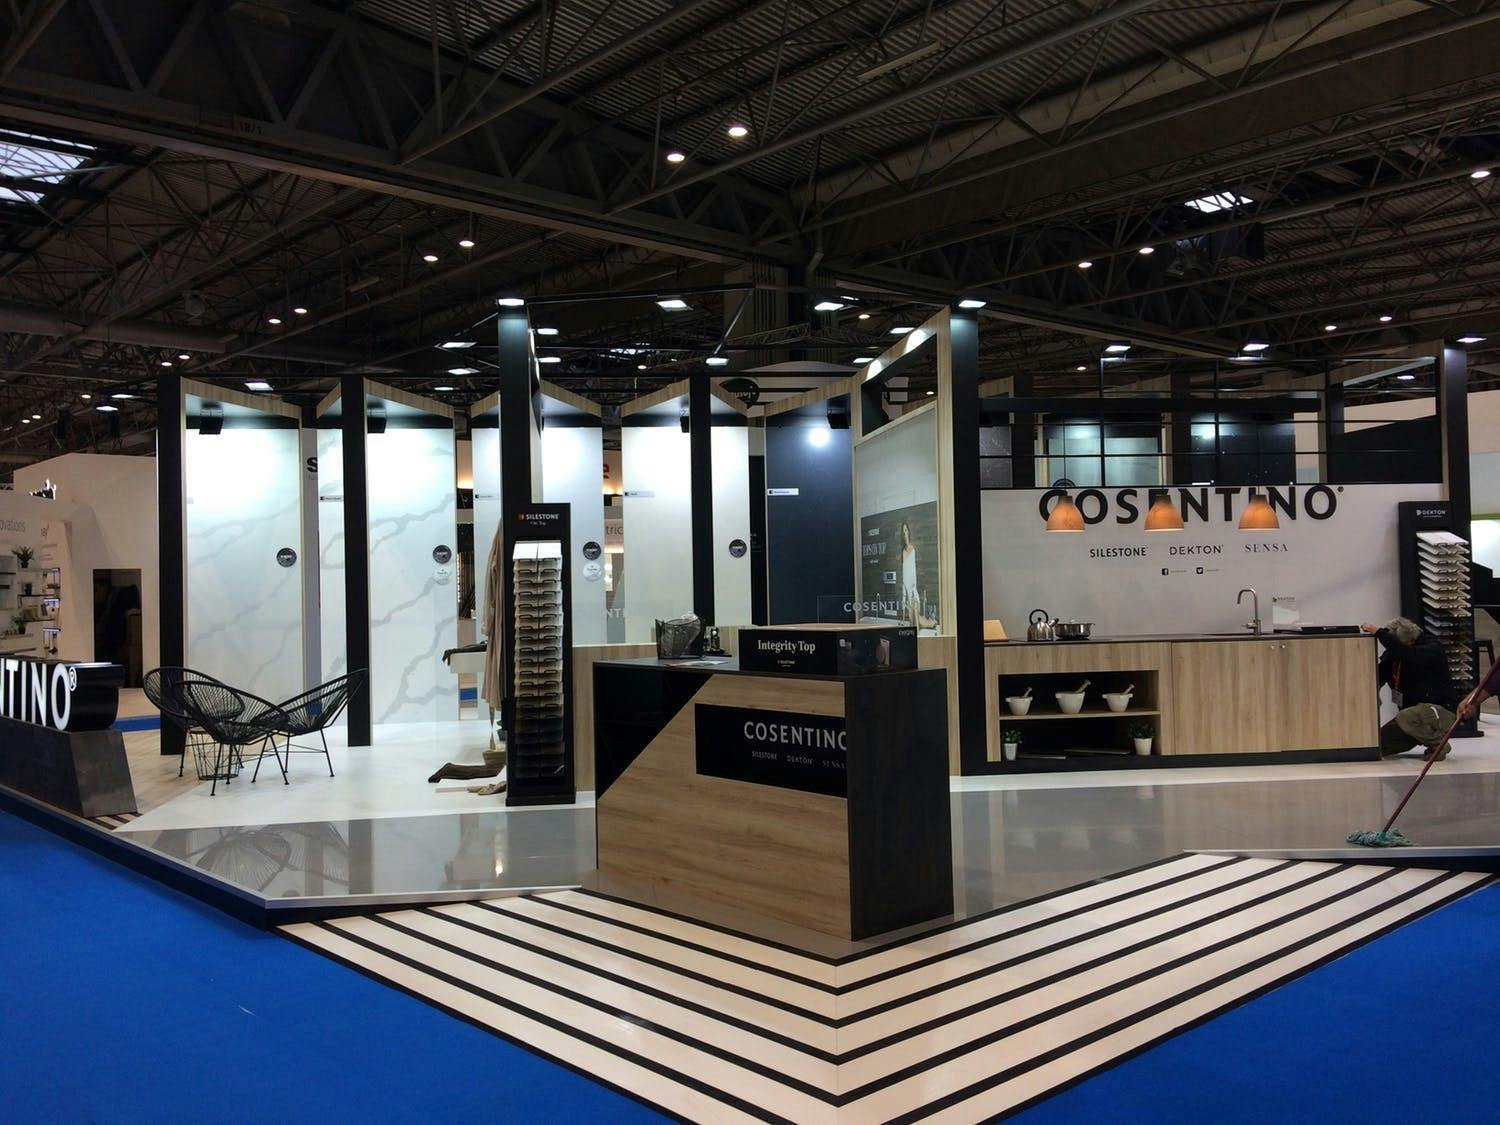 Image 35 of Stand Cosentino KBB Birmingham 2 1 5 in Cosentino surprises at the KBB Birmingham fair - Cosentino